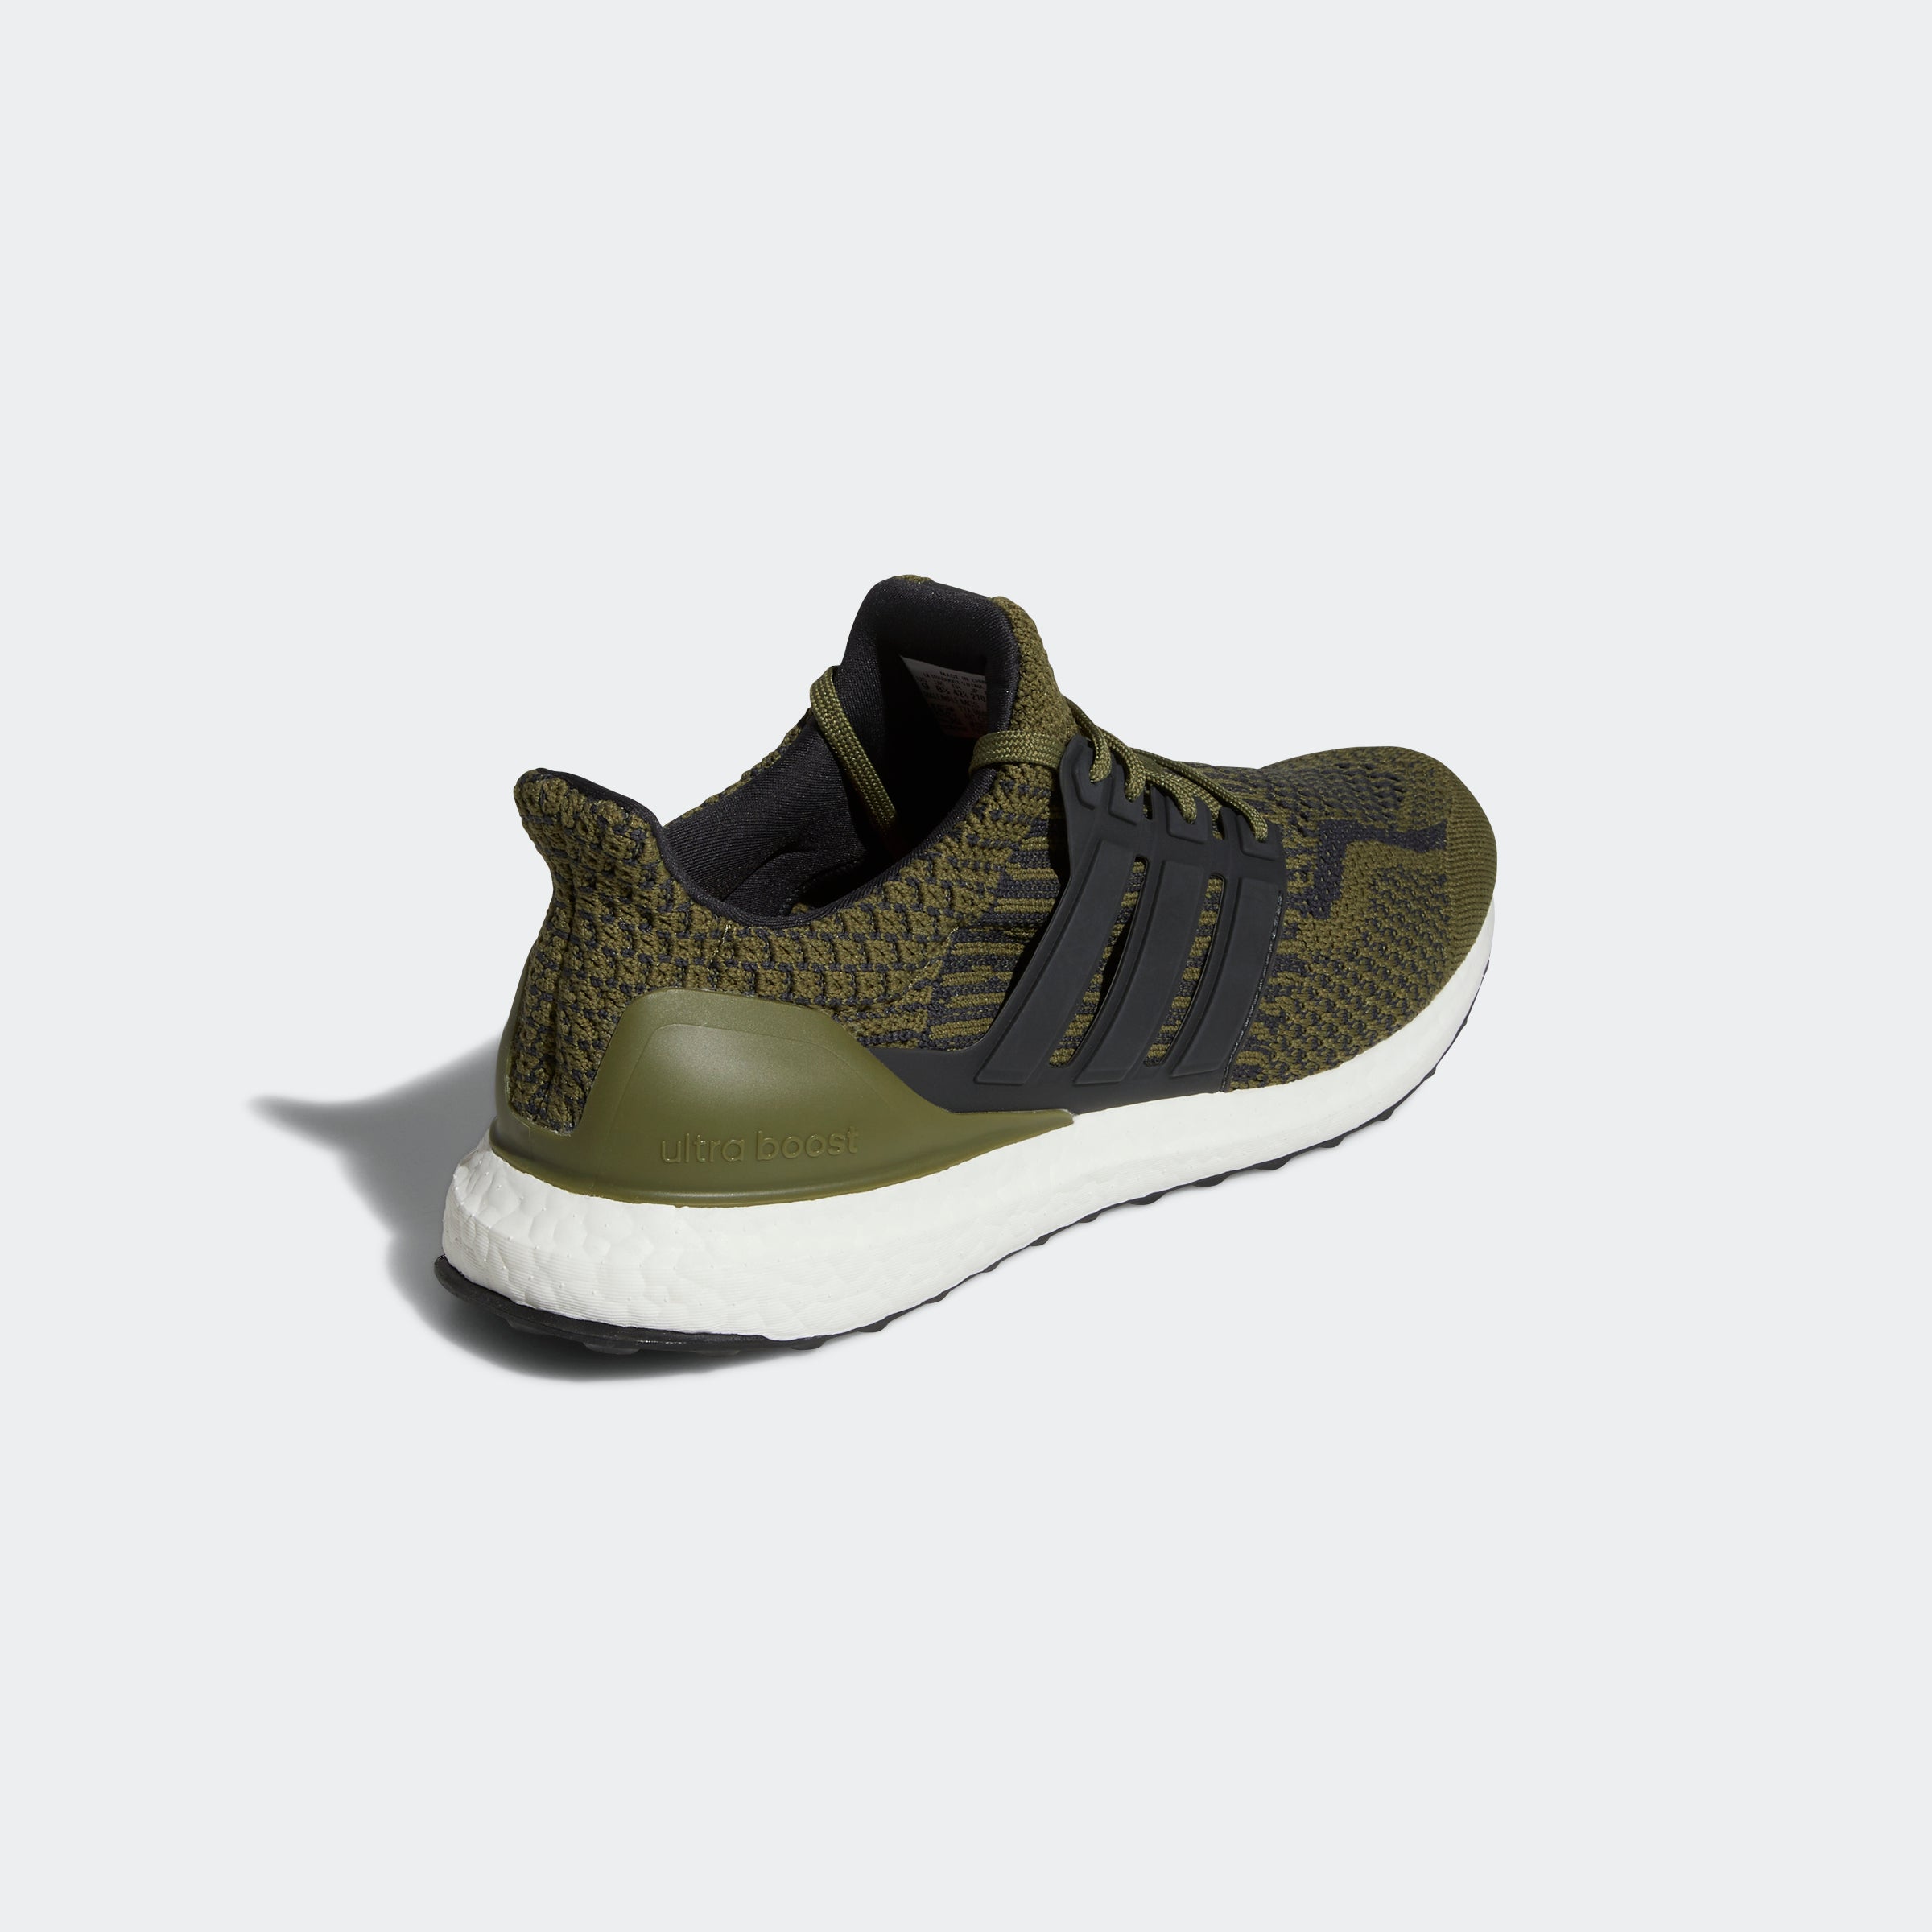 adidas Ultraboost DNA Shoes Olive Chicago City